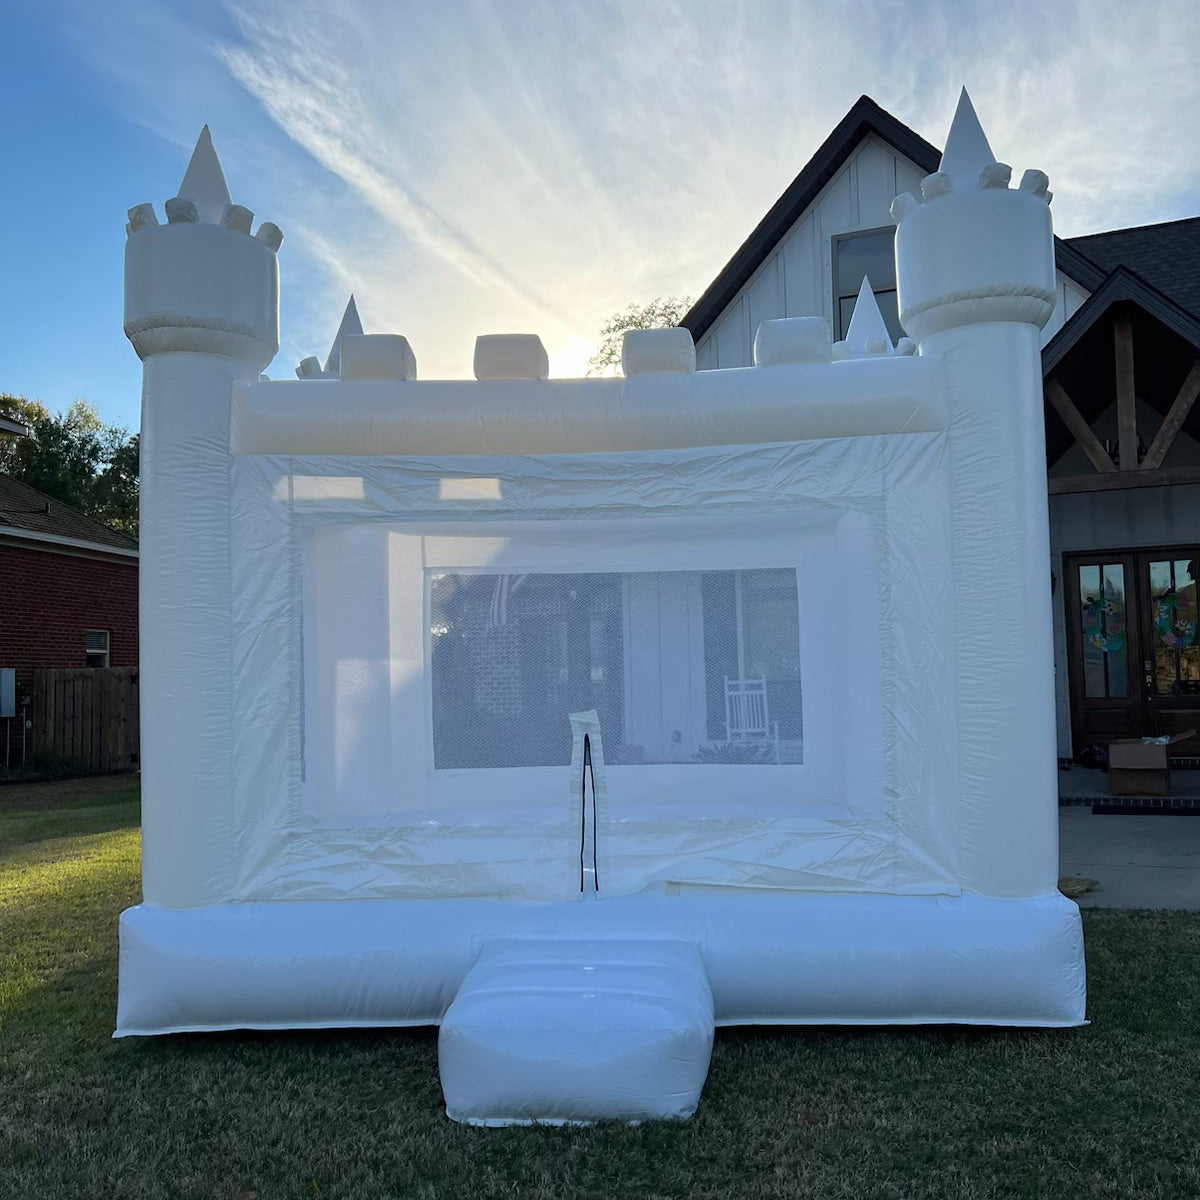 White Bouncer Jumping Inflatable Wedding Bouncy Castle White Bounce House